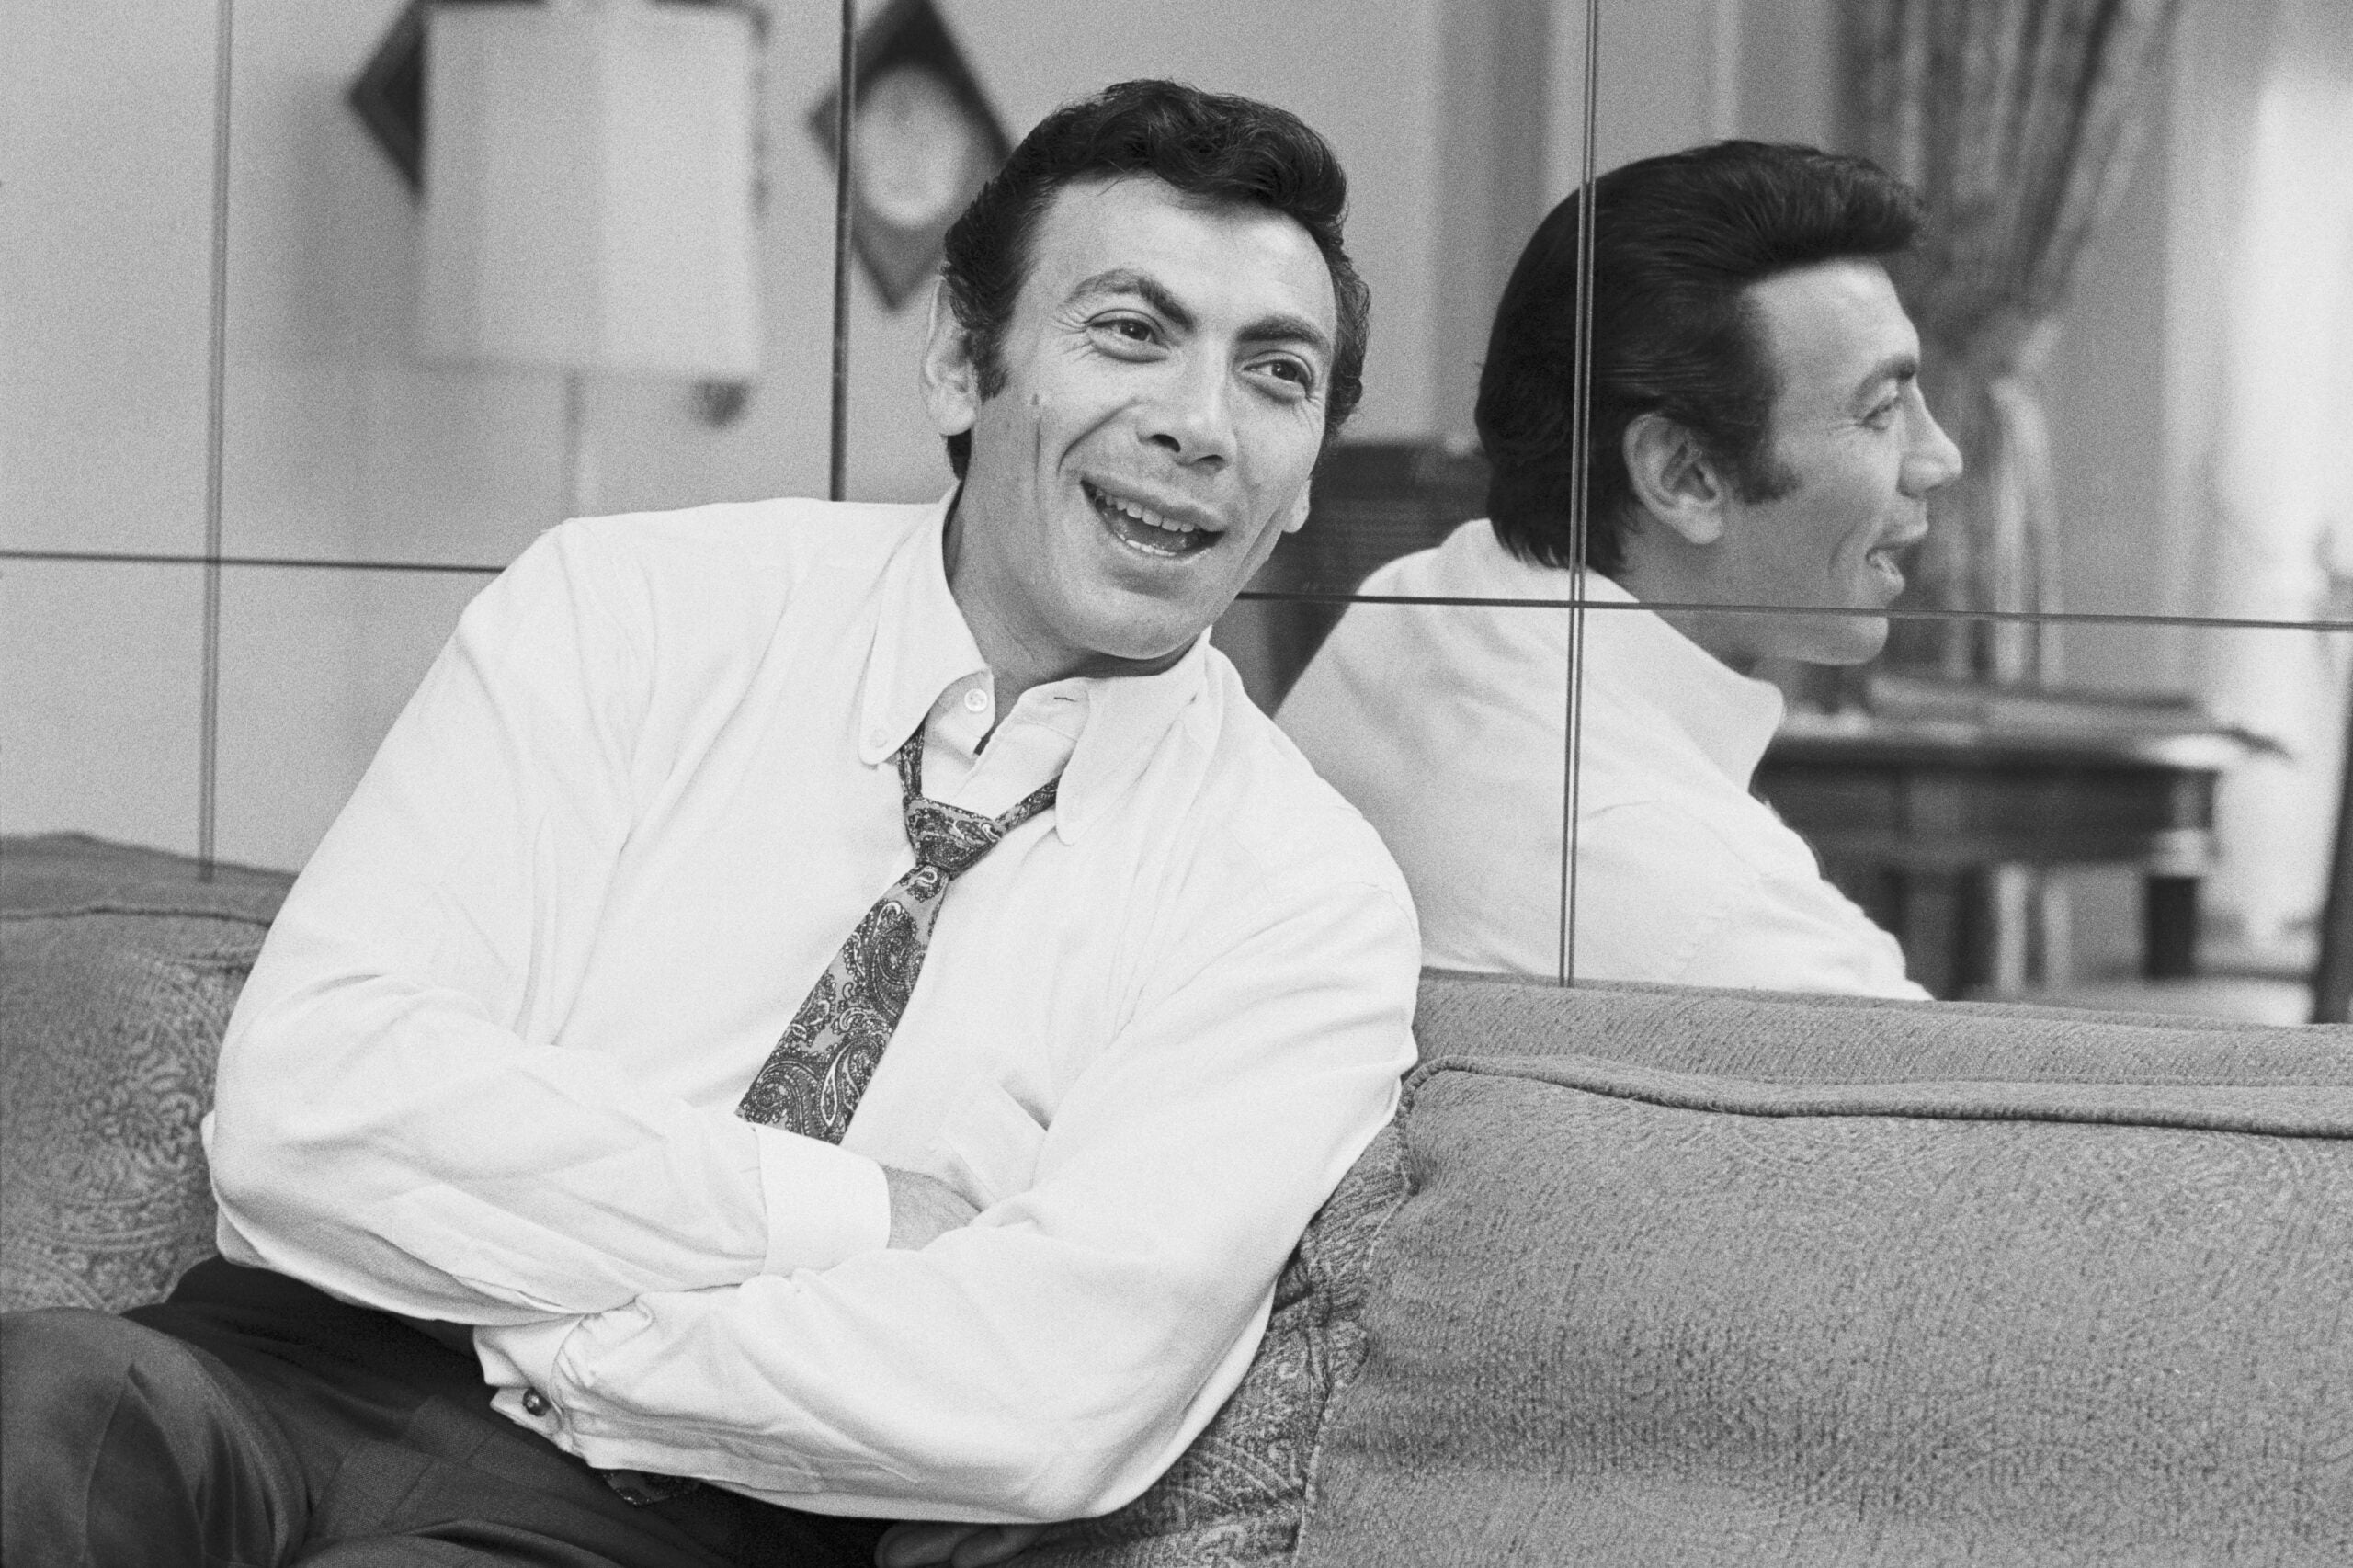 Ed Ames in a white button up shirt and tie, smiling and sitting on a couch with his arms folded as he leans back against a mirror.